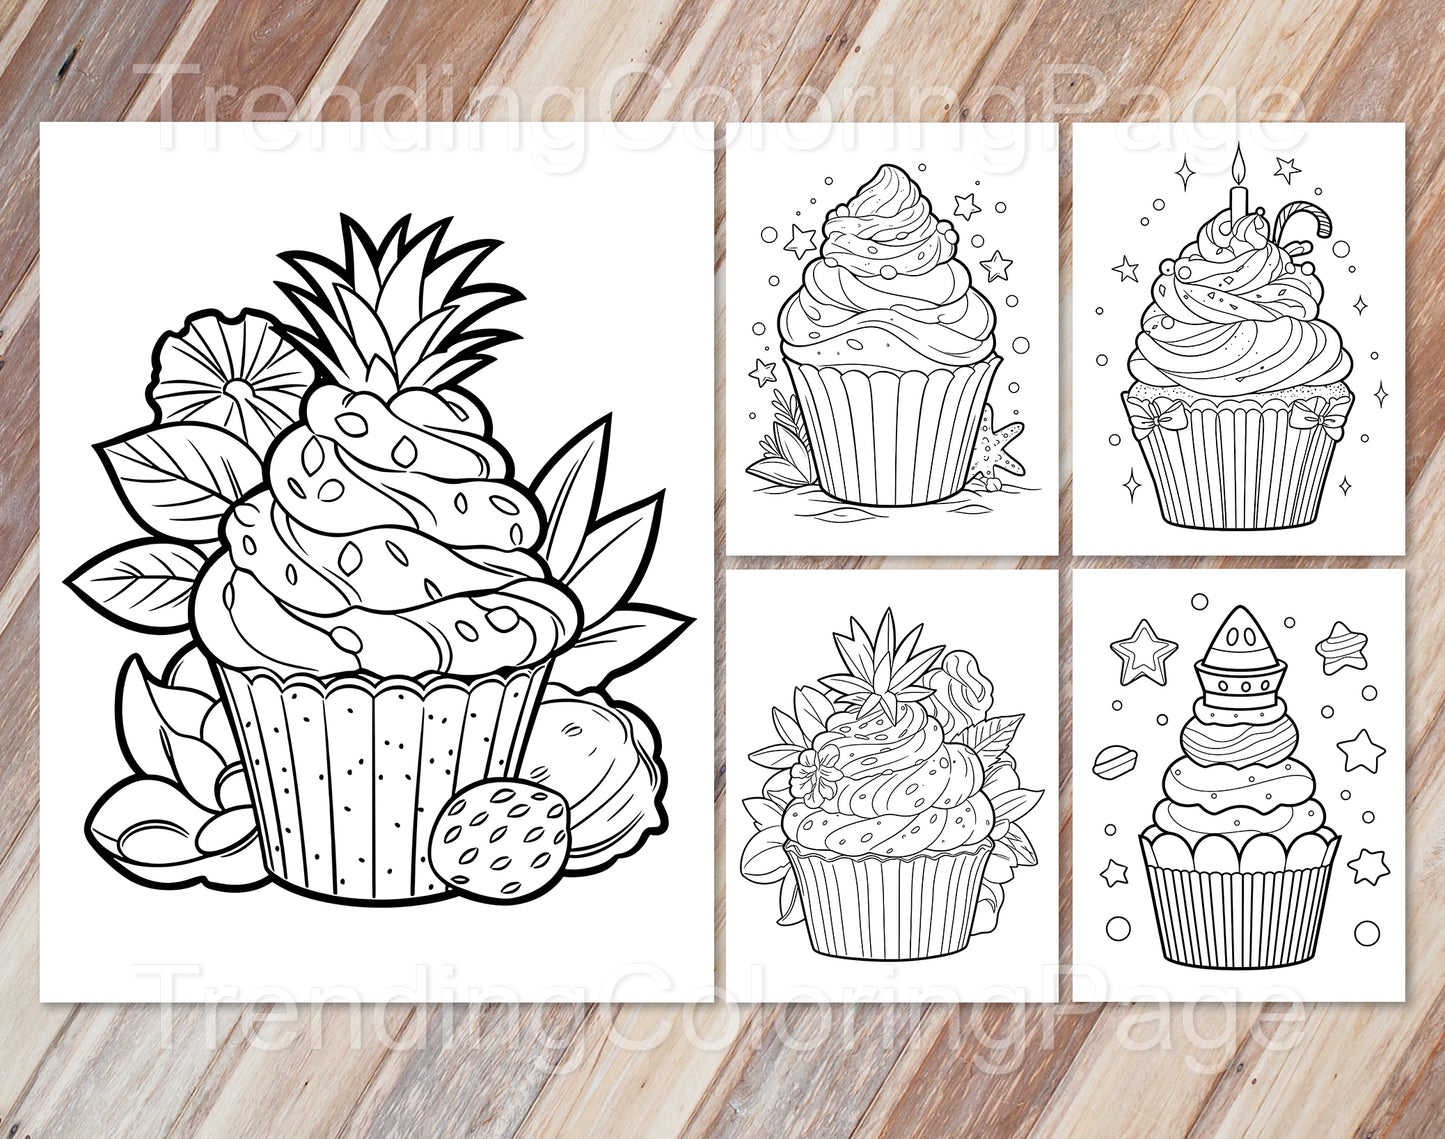 30 Adorable Cupcake Coloring Pages - Instant Download - Printable PDF